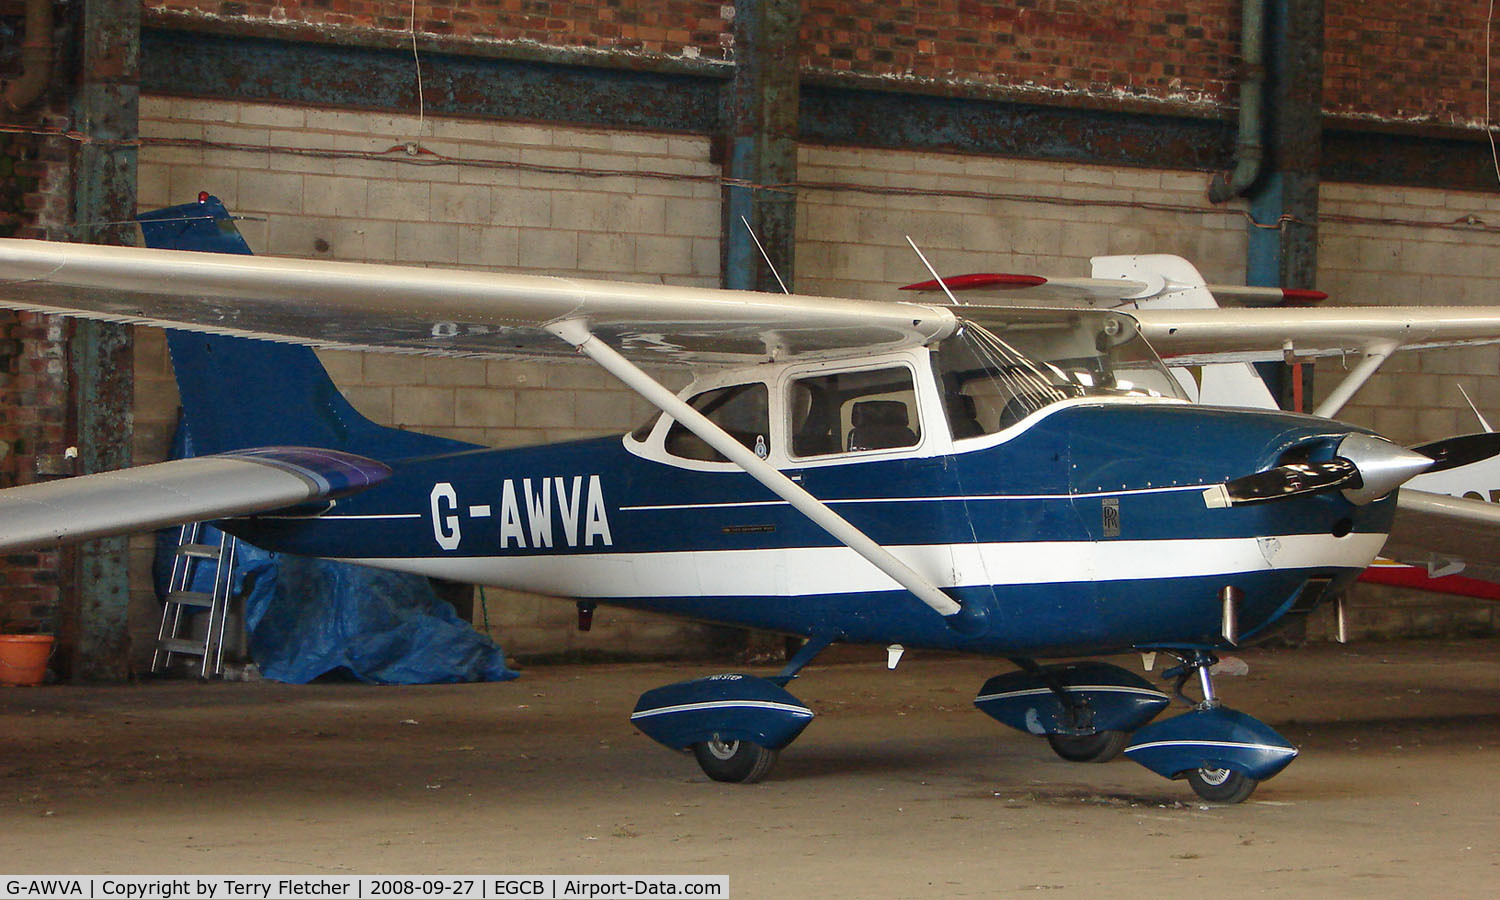 G-AWVA, 1968 Reims F172H Skyhawk C/N 0597, Cessna F172H photographed at Manchester Barton Open Day in Sept 2008